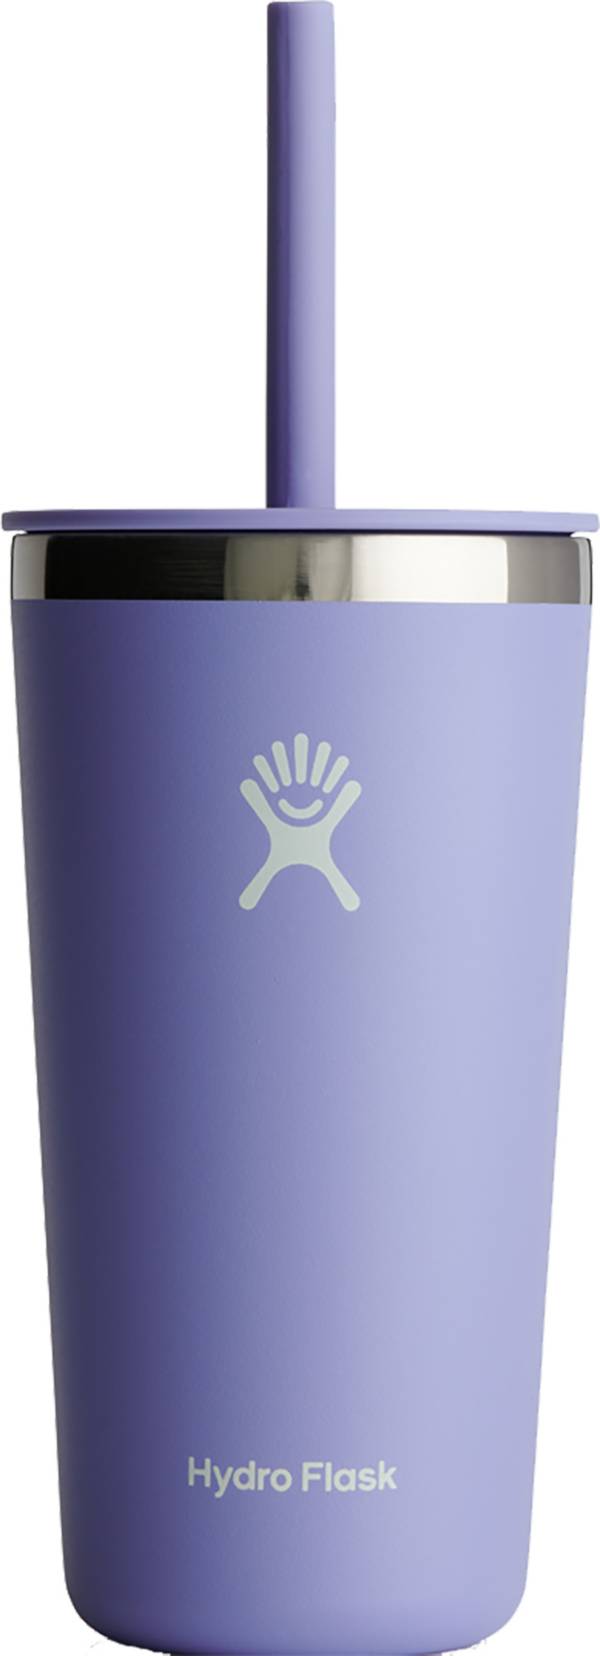 Hydro Flask 20 oz All Around Tumbler w/ Straw lid product image